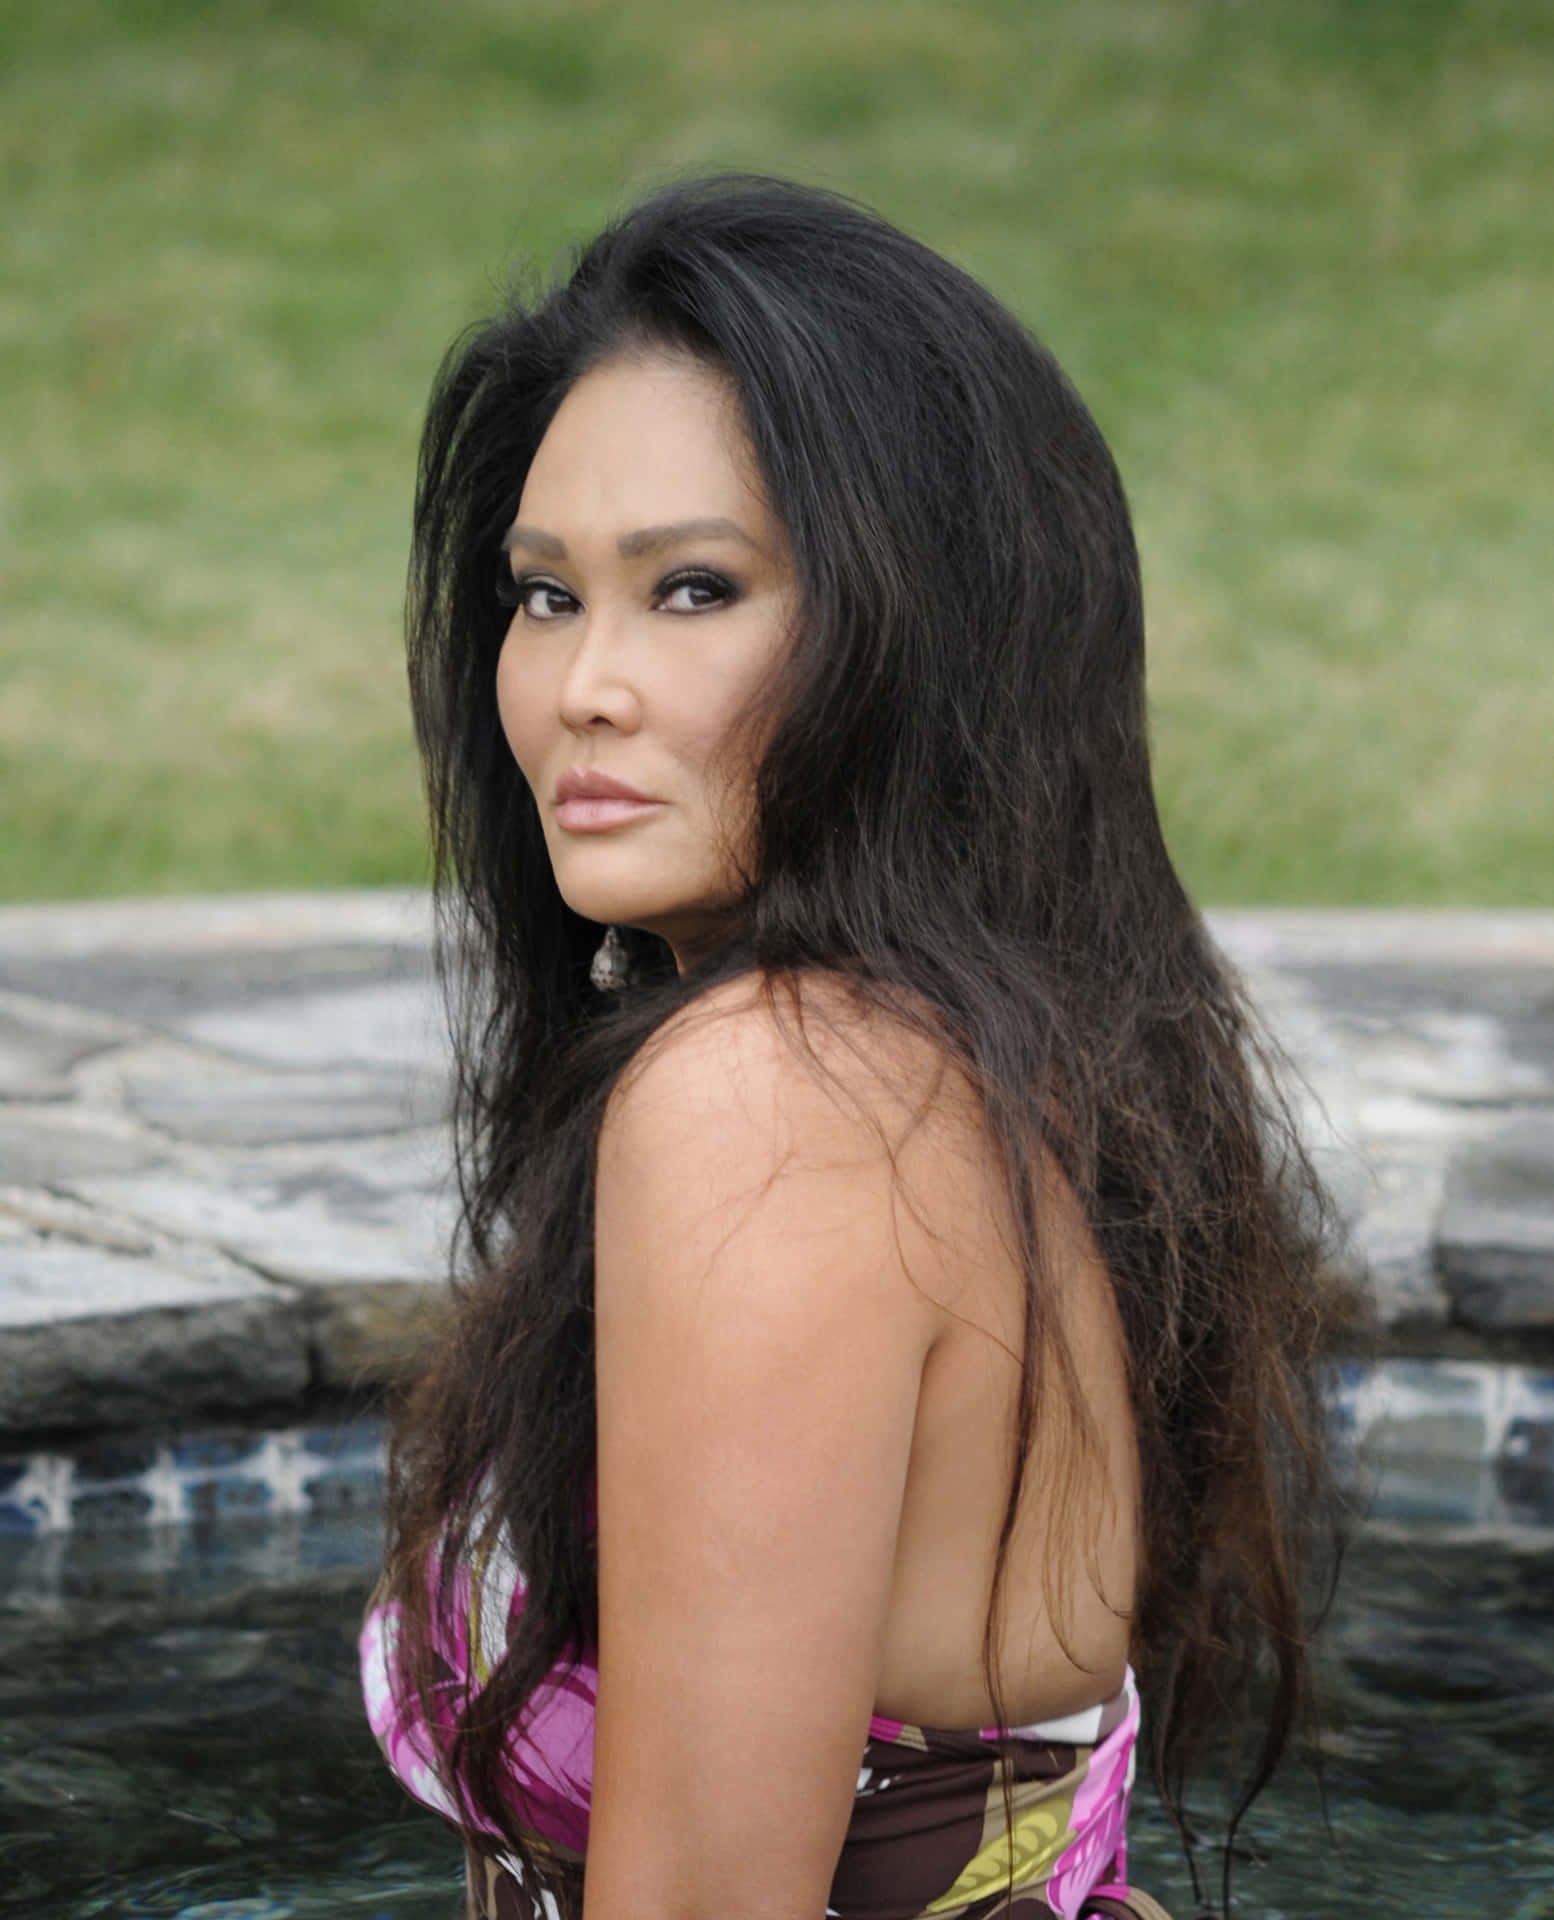 Tia Carrere Glowing Radiantly At A Celebrity Gala Event Wallpaper